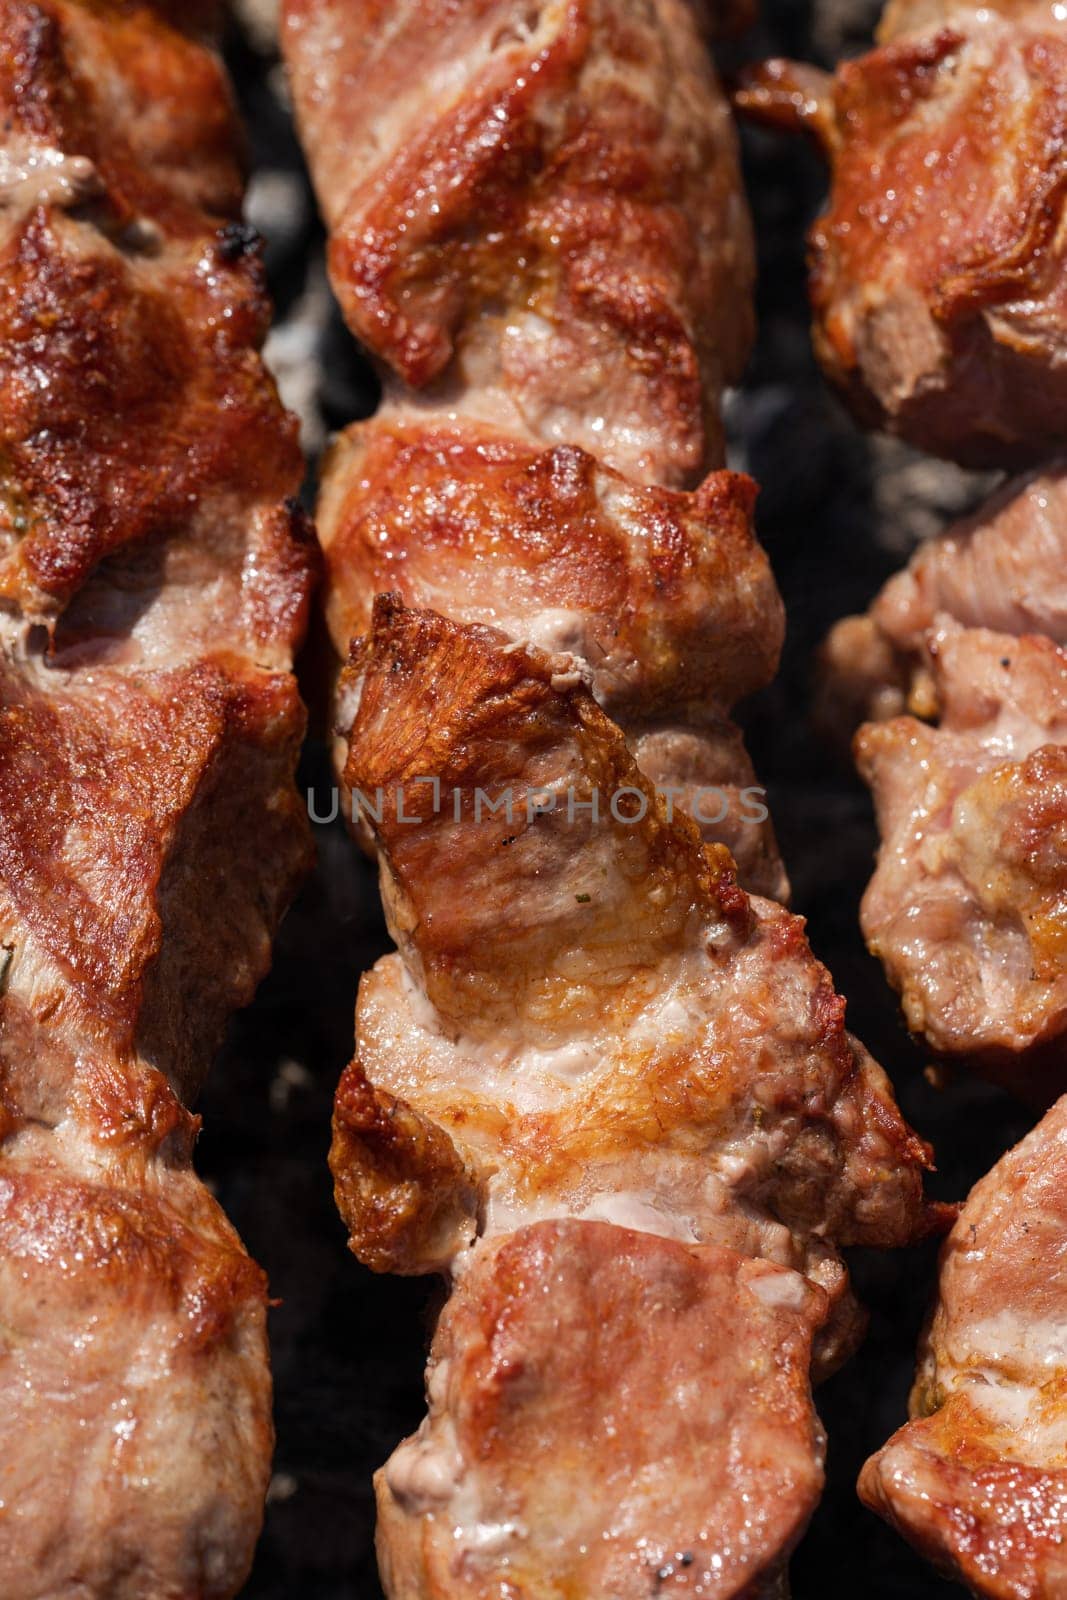 Appetizing juicy pork shish kebabs cooking on metal skewers on charcoal grill with fragrant smoke. Closeup view, selective focus on tasty pieces of roast meat. Cooking during summer picnic.